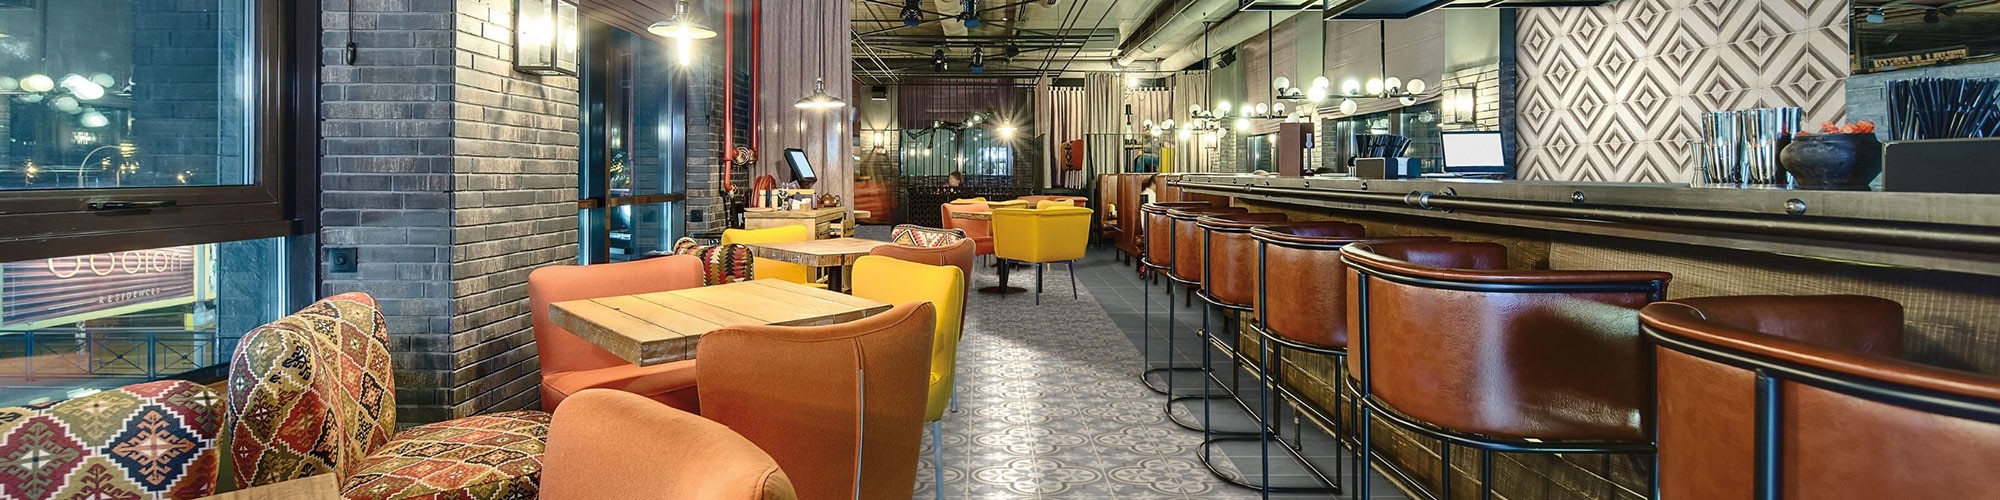 Restaurant with gray & beige encaustic floor tile, wood tables with bright mismatched chairs, encaustic wall tile, brick columns, and ceiling with exposed pipes & ductwork.